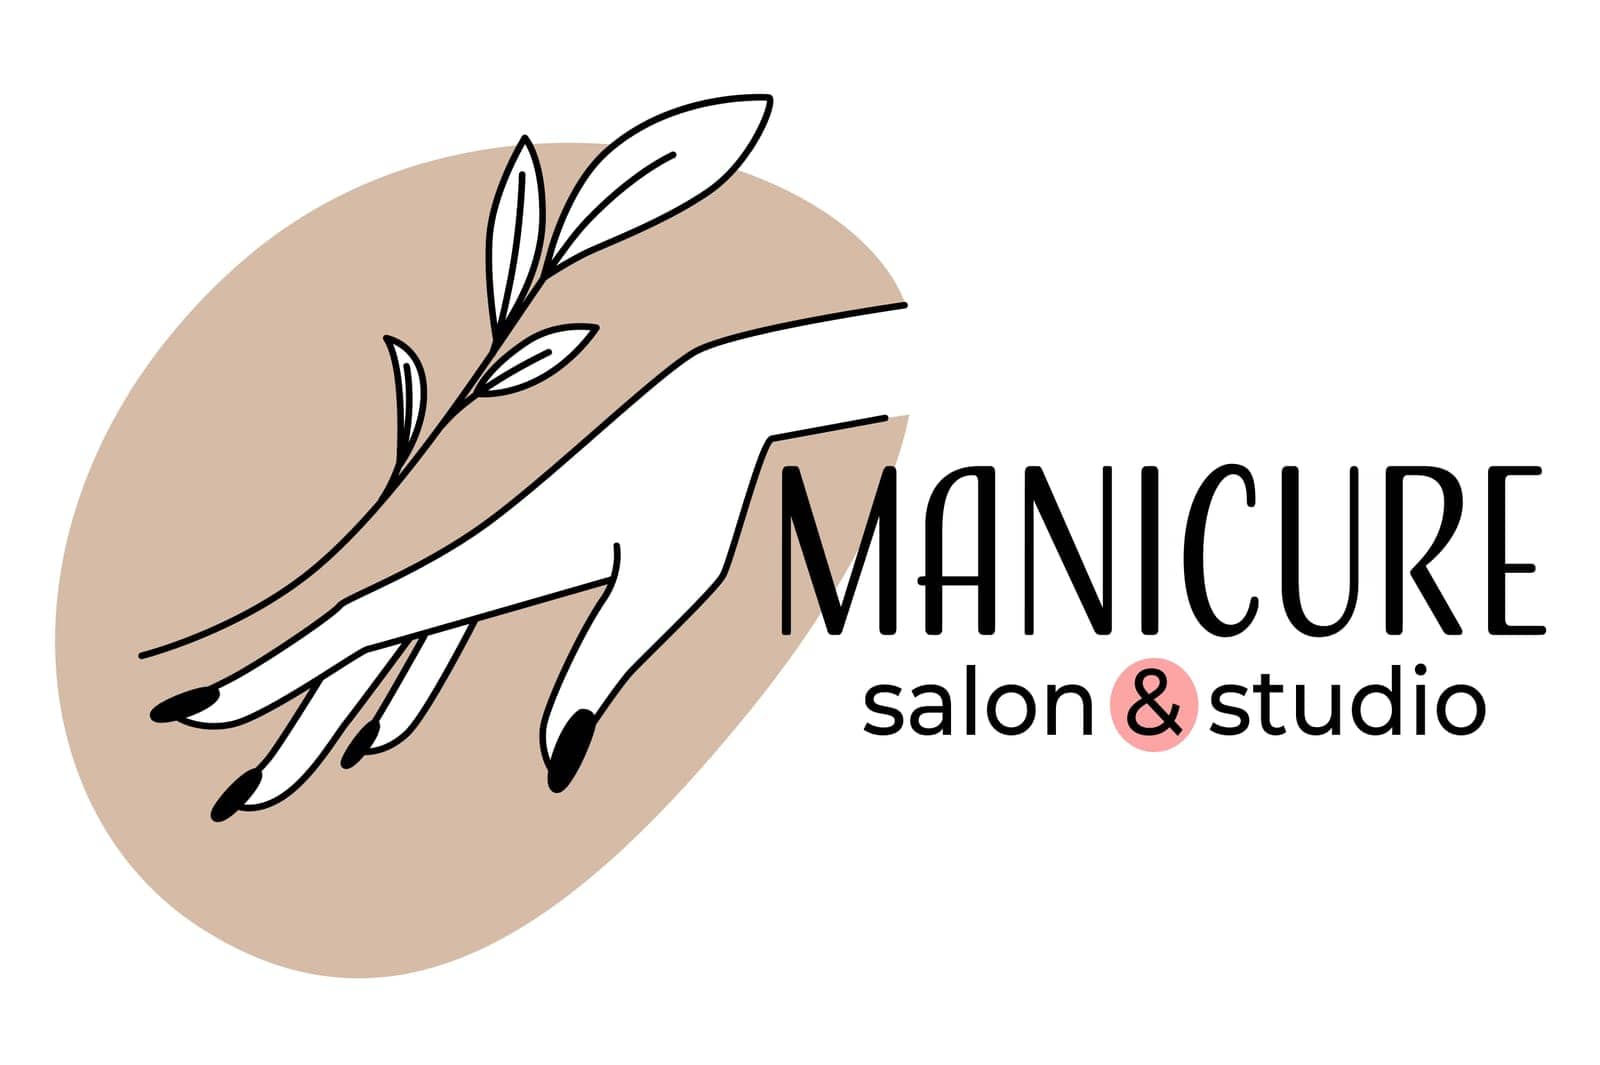 Manicure salon and studio, nail treatment and care by Sonulkaster